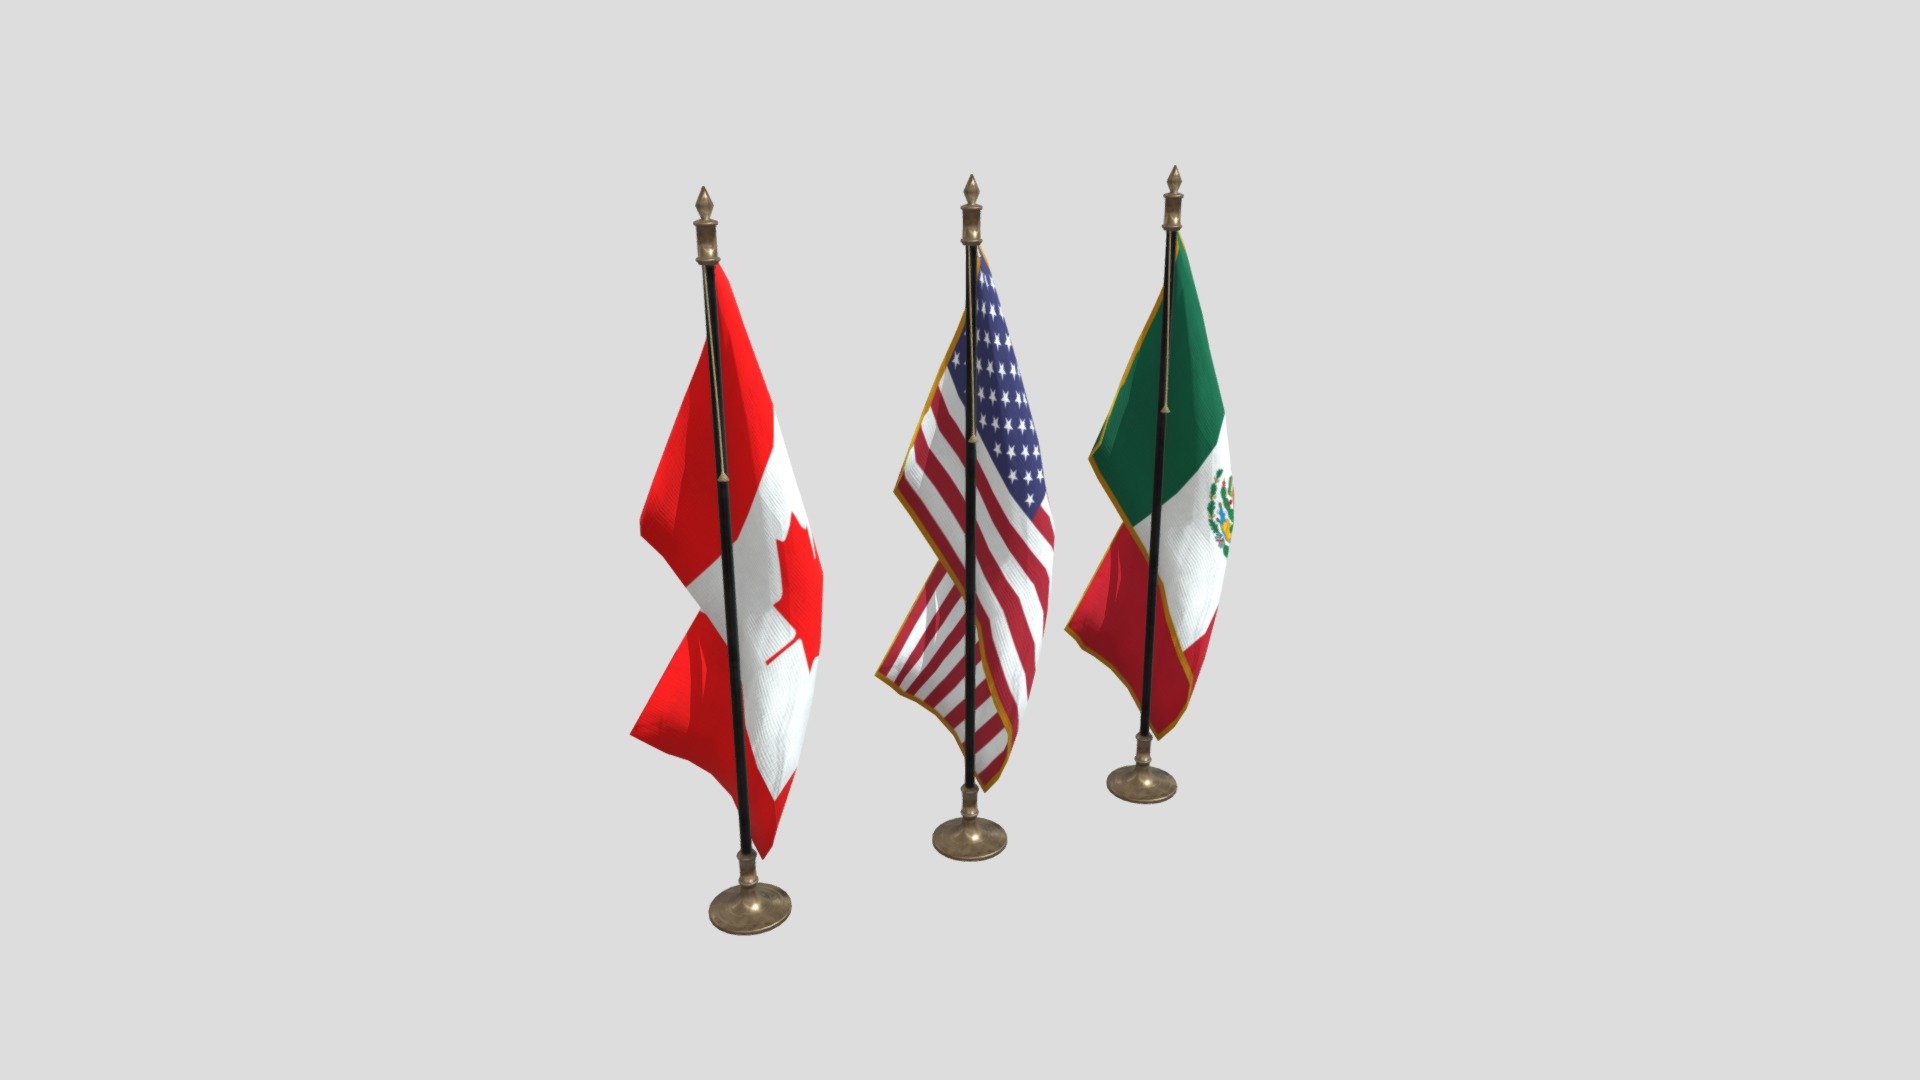 These small country flags are perfect for any political, office, or national scene. The models are lowpoly and are viewable from all angles and distances.

This includes:

The mesh
4K and 2K Texture set (Albedo, Metallic, Roughness, Normal, Height)
3 Variations ( American, Mexican, Canadian)
The mesh is UV Unwrapped with vertex colors and can easily be retextured 3d model